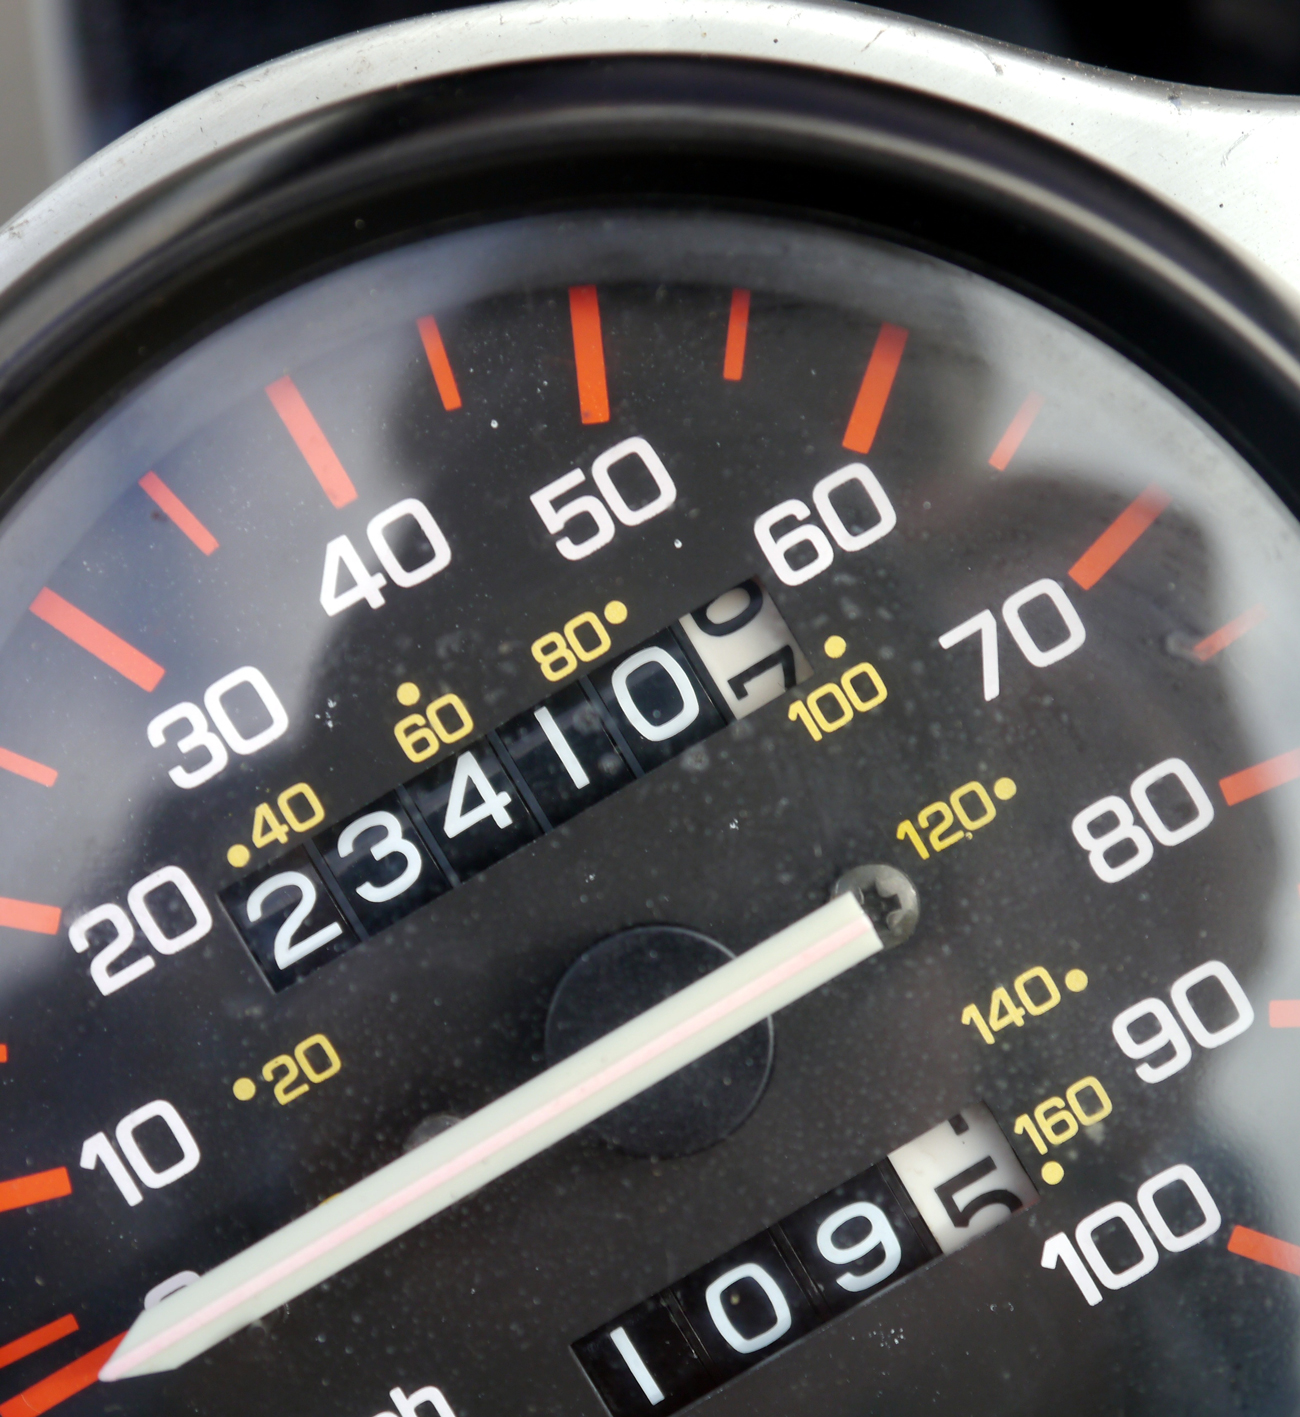 A speedometer dial in a car